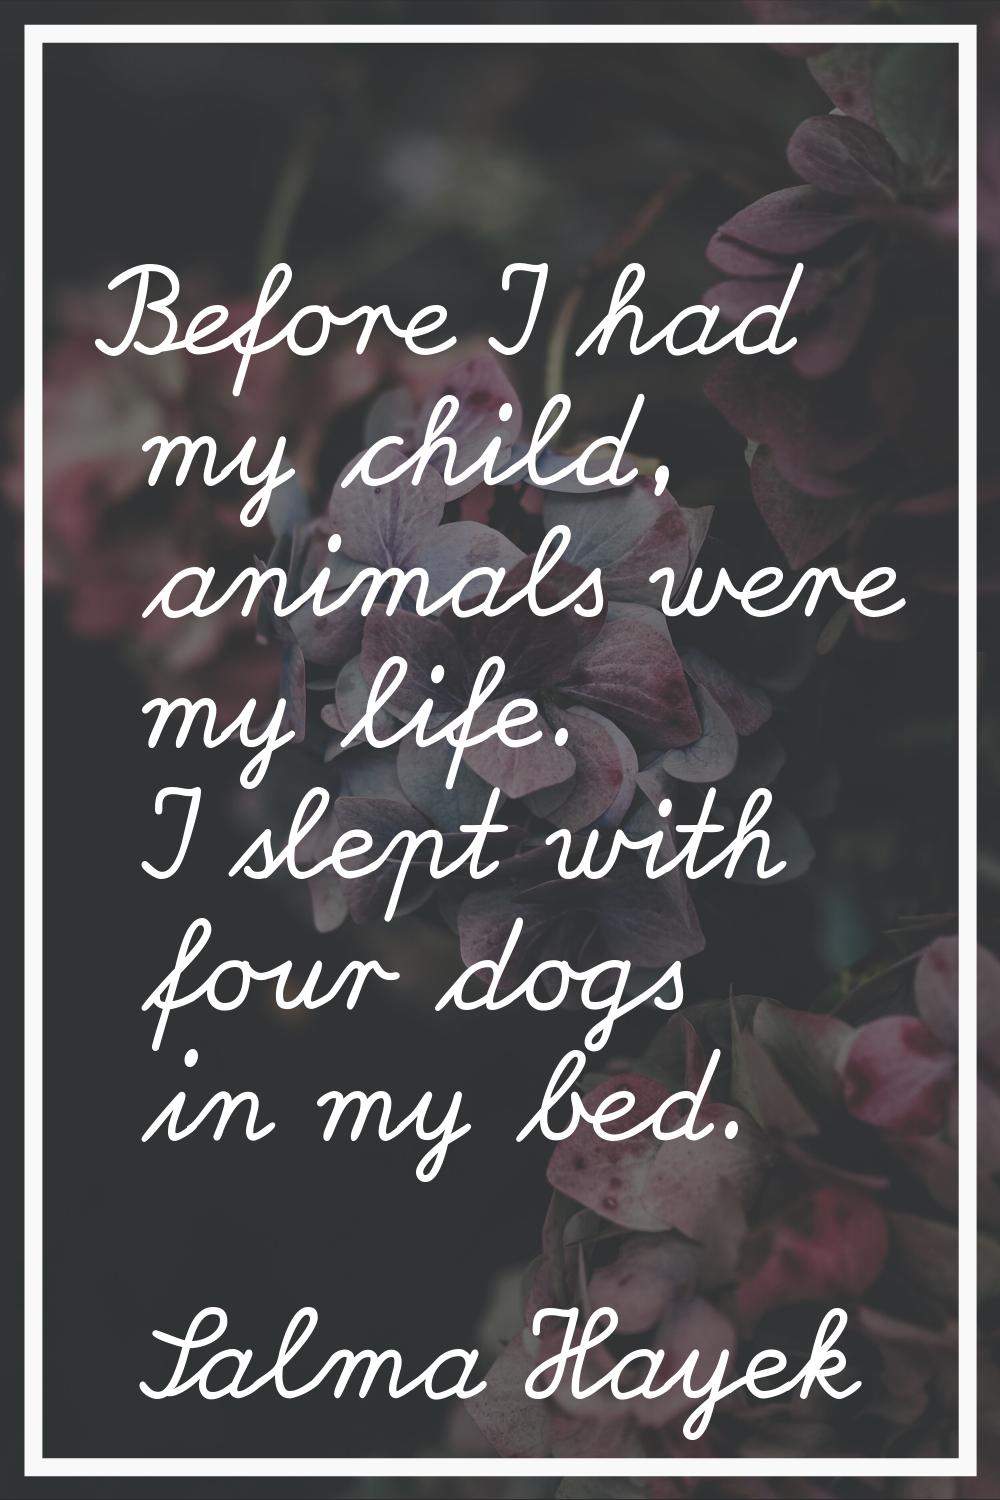 Before I had my child, animals were my life. I slept with four dogs in my bed.